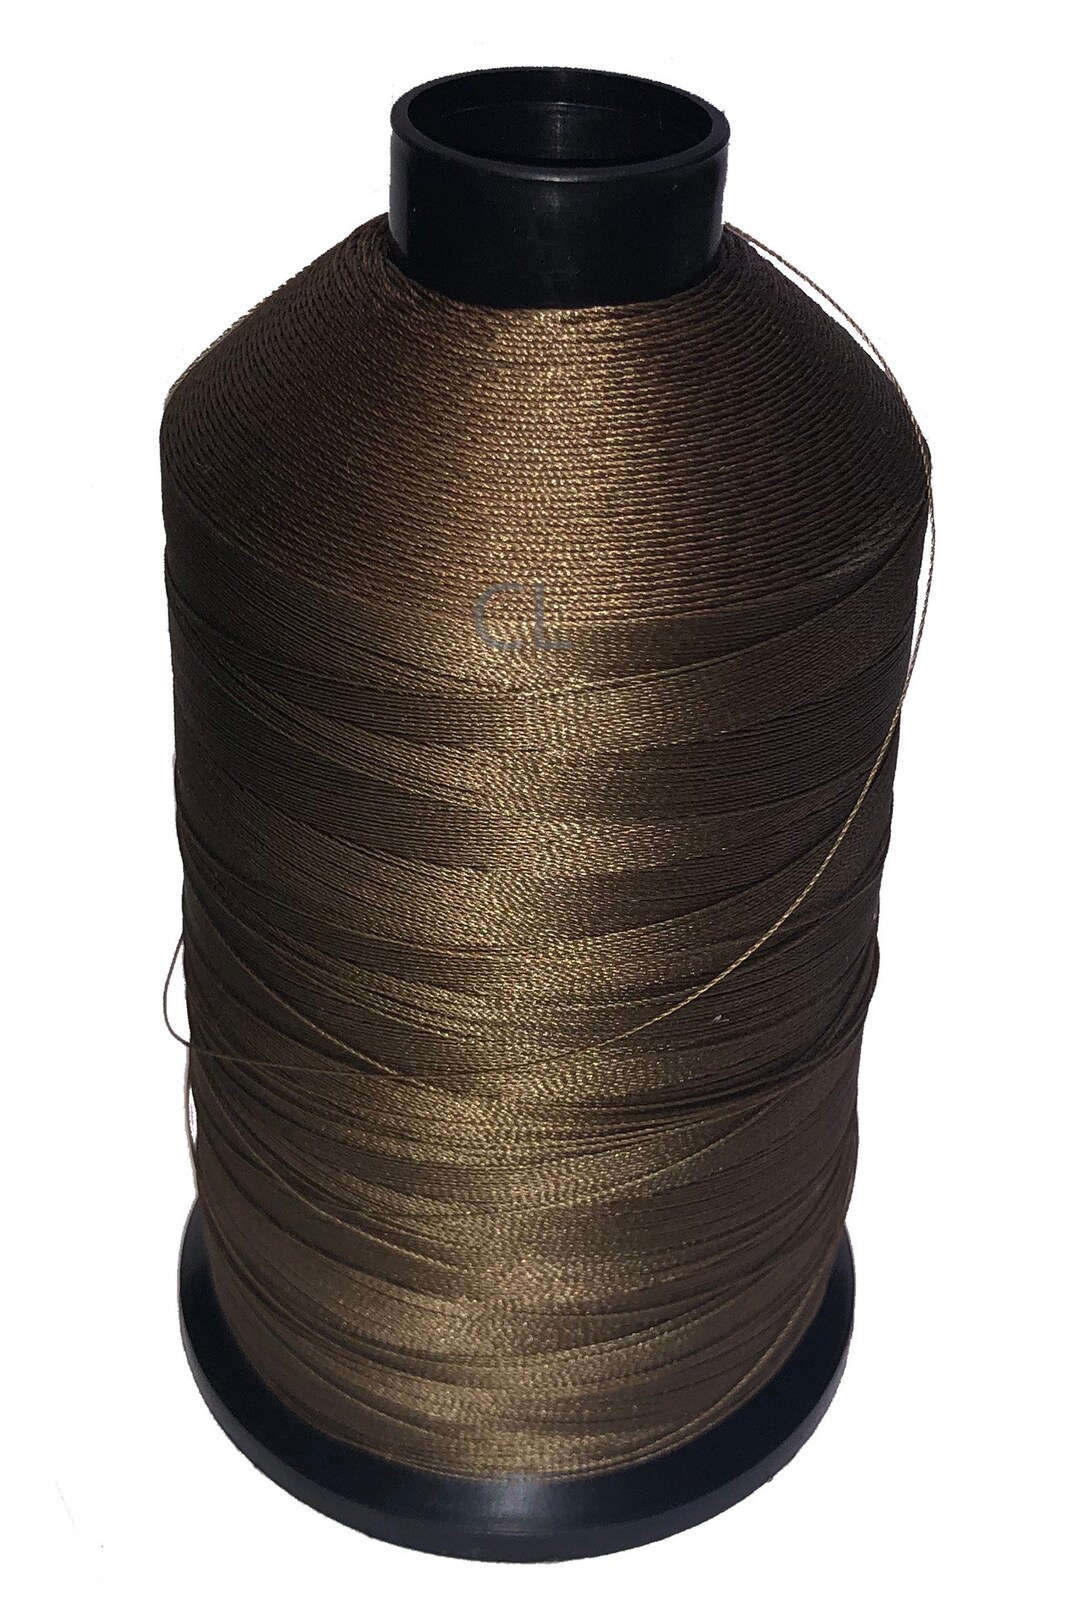 Coyote Brown 3000m Cone 40's Bonded Nylon Thread military Specification 